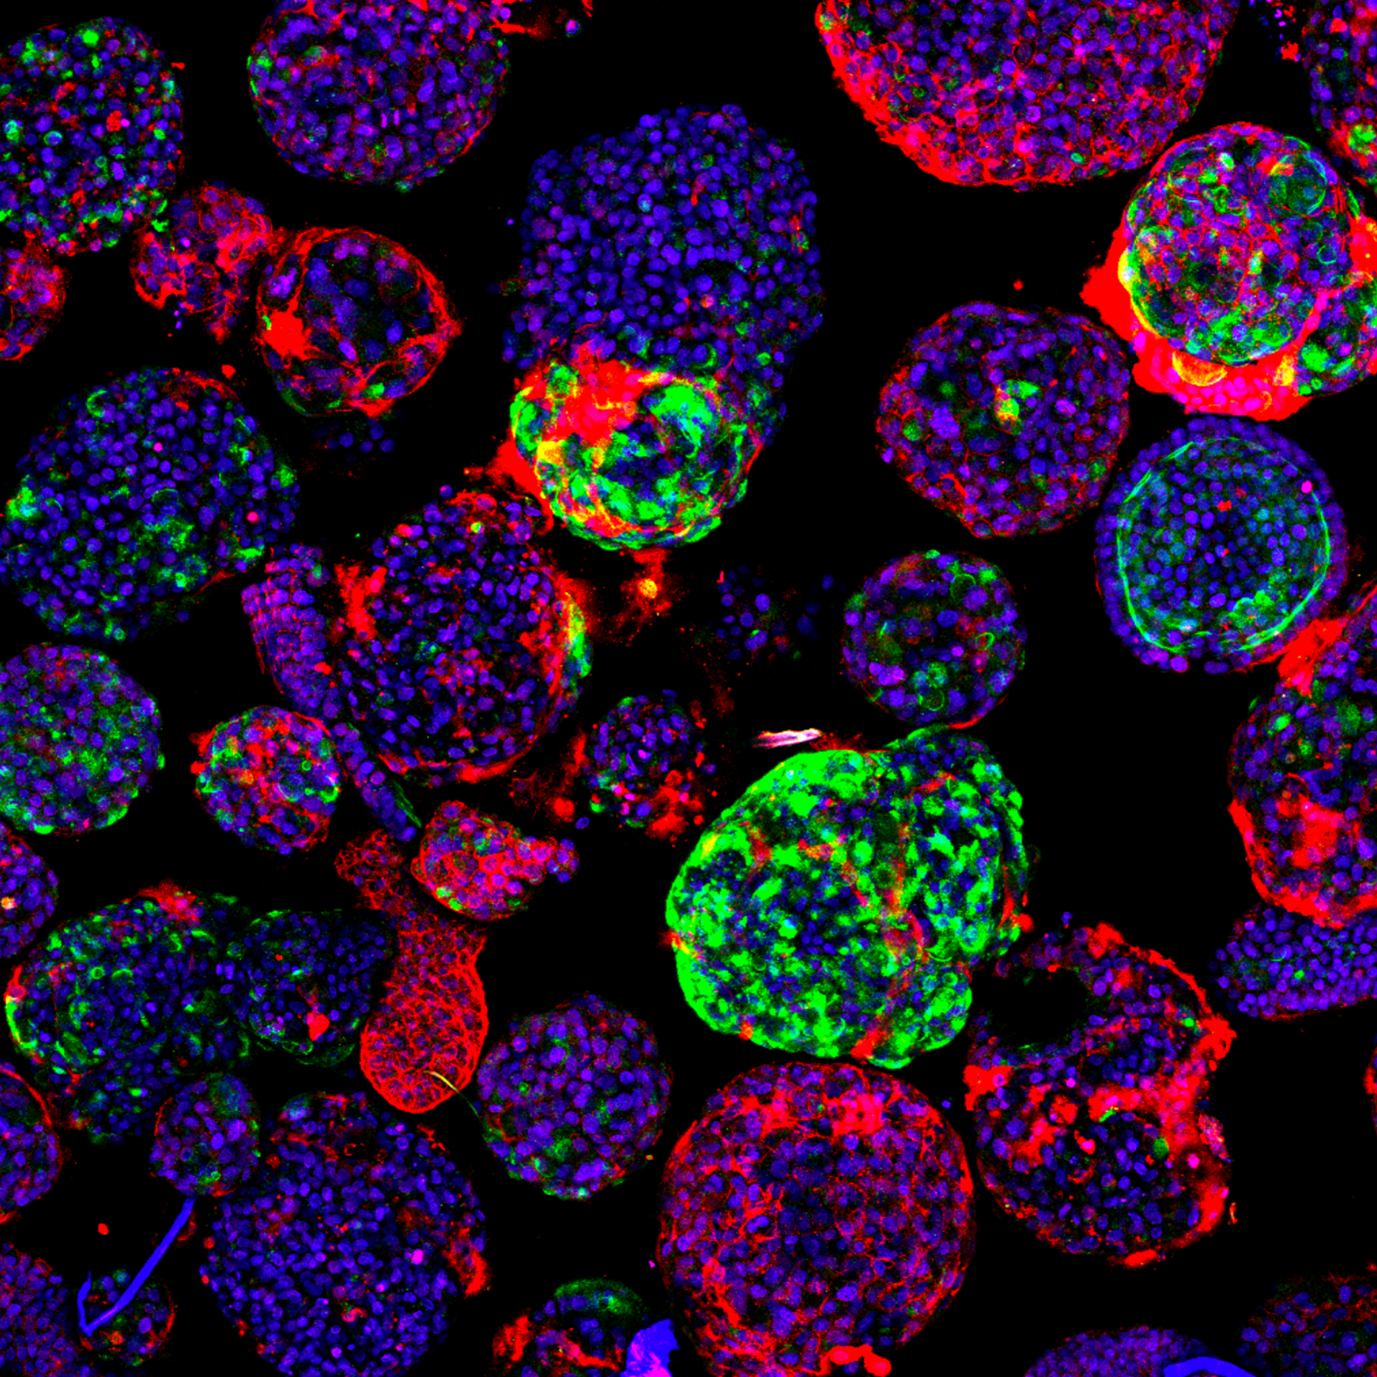 New insights into liver cancer using mini organs